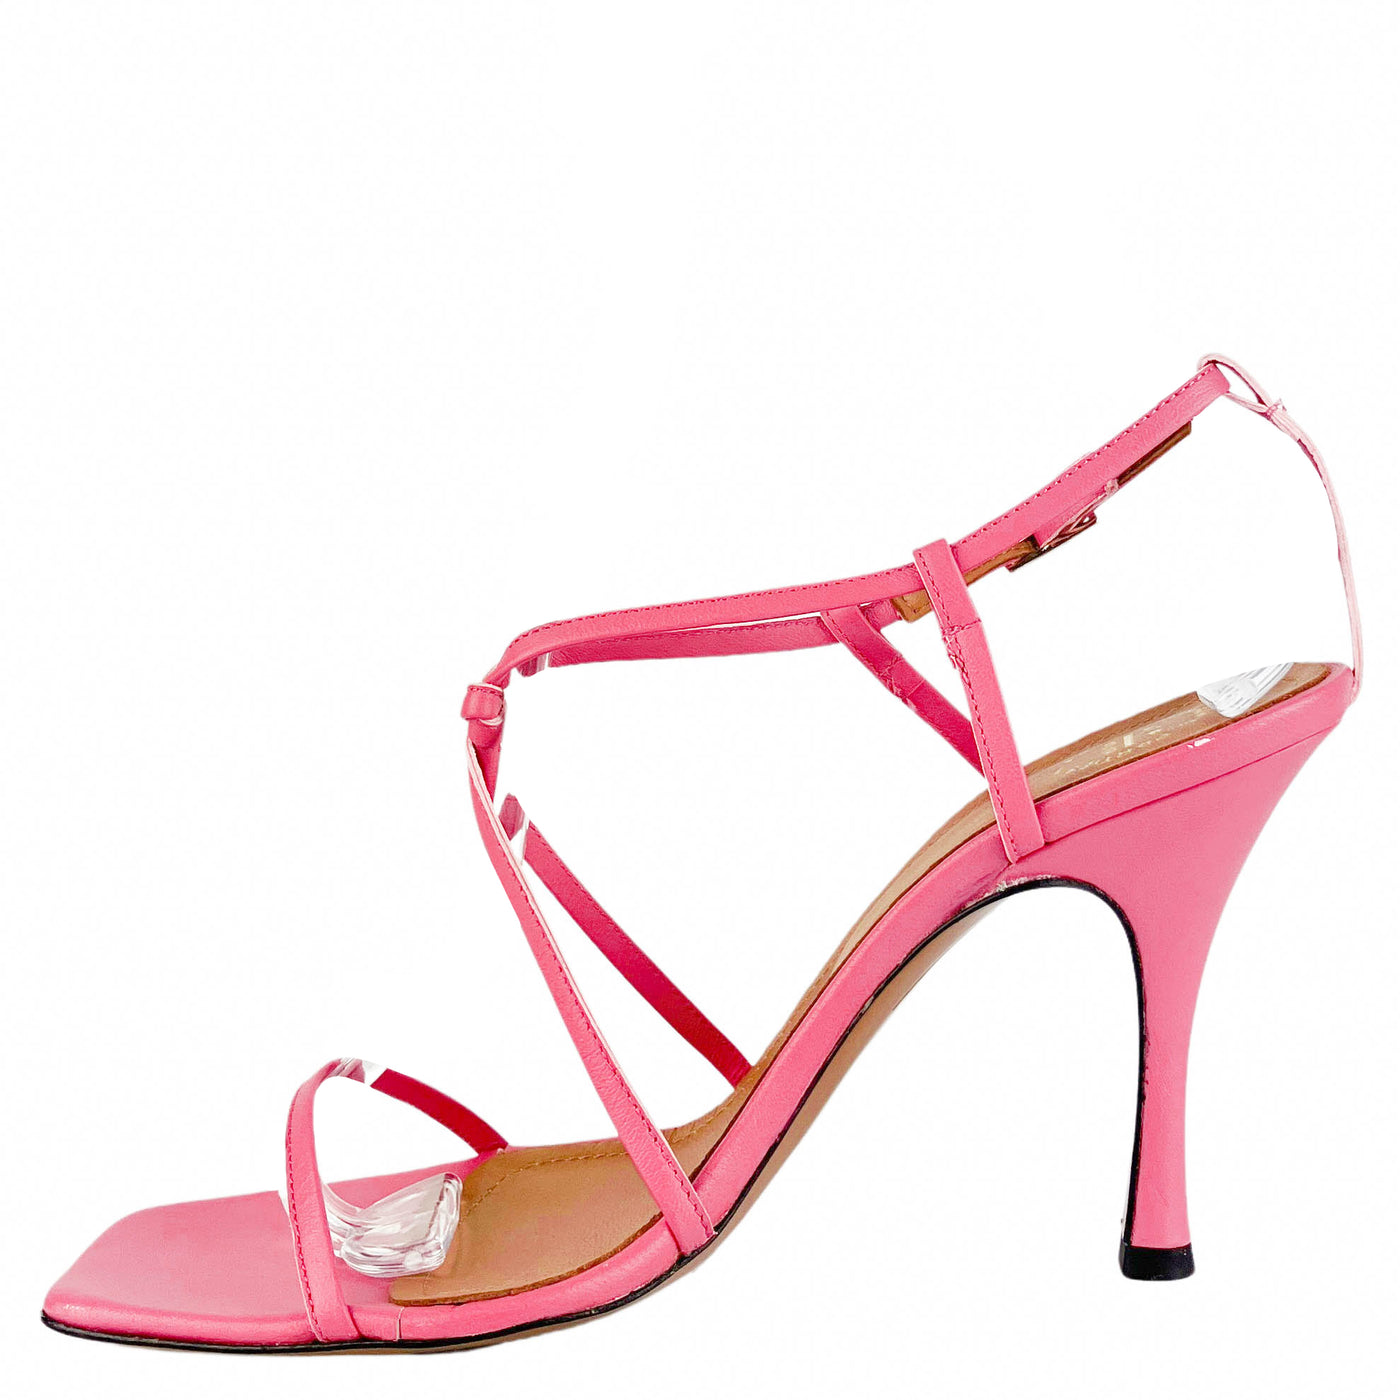 ATP Lapedona Strappy Sandals in Pink - Discounts on ATP Atelier at UAL